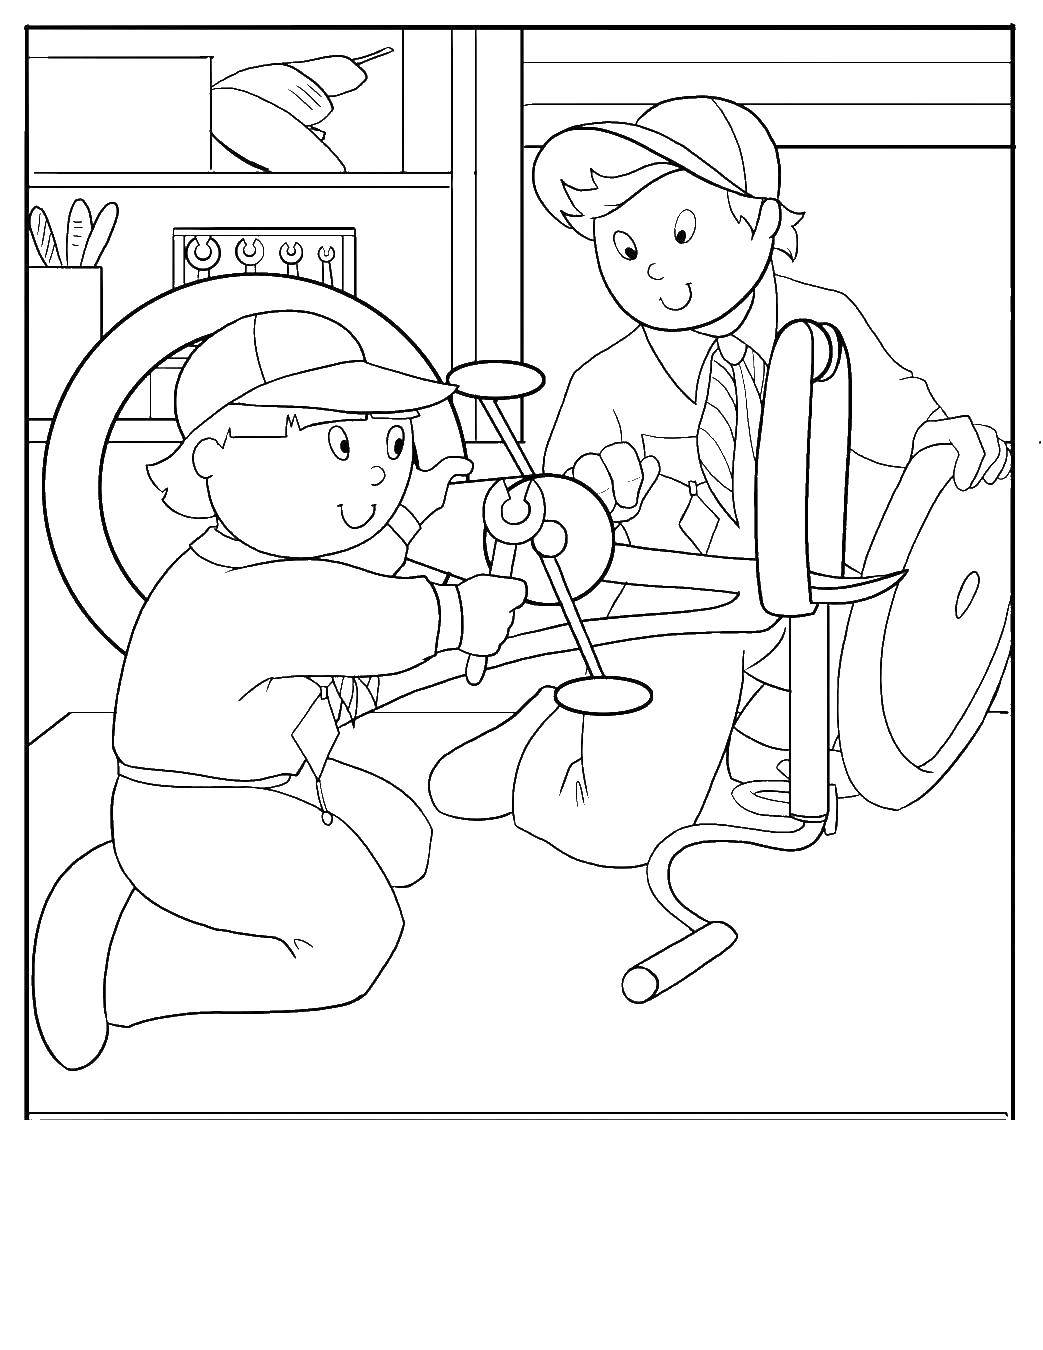 Coloring Boys repairing Bicycle. Category children. Tags:  children, Bicycle.